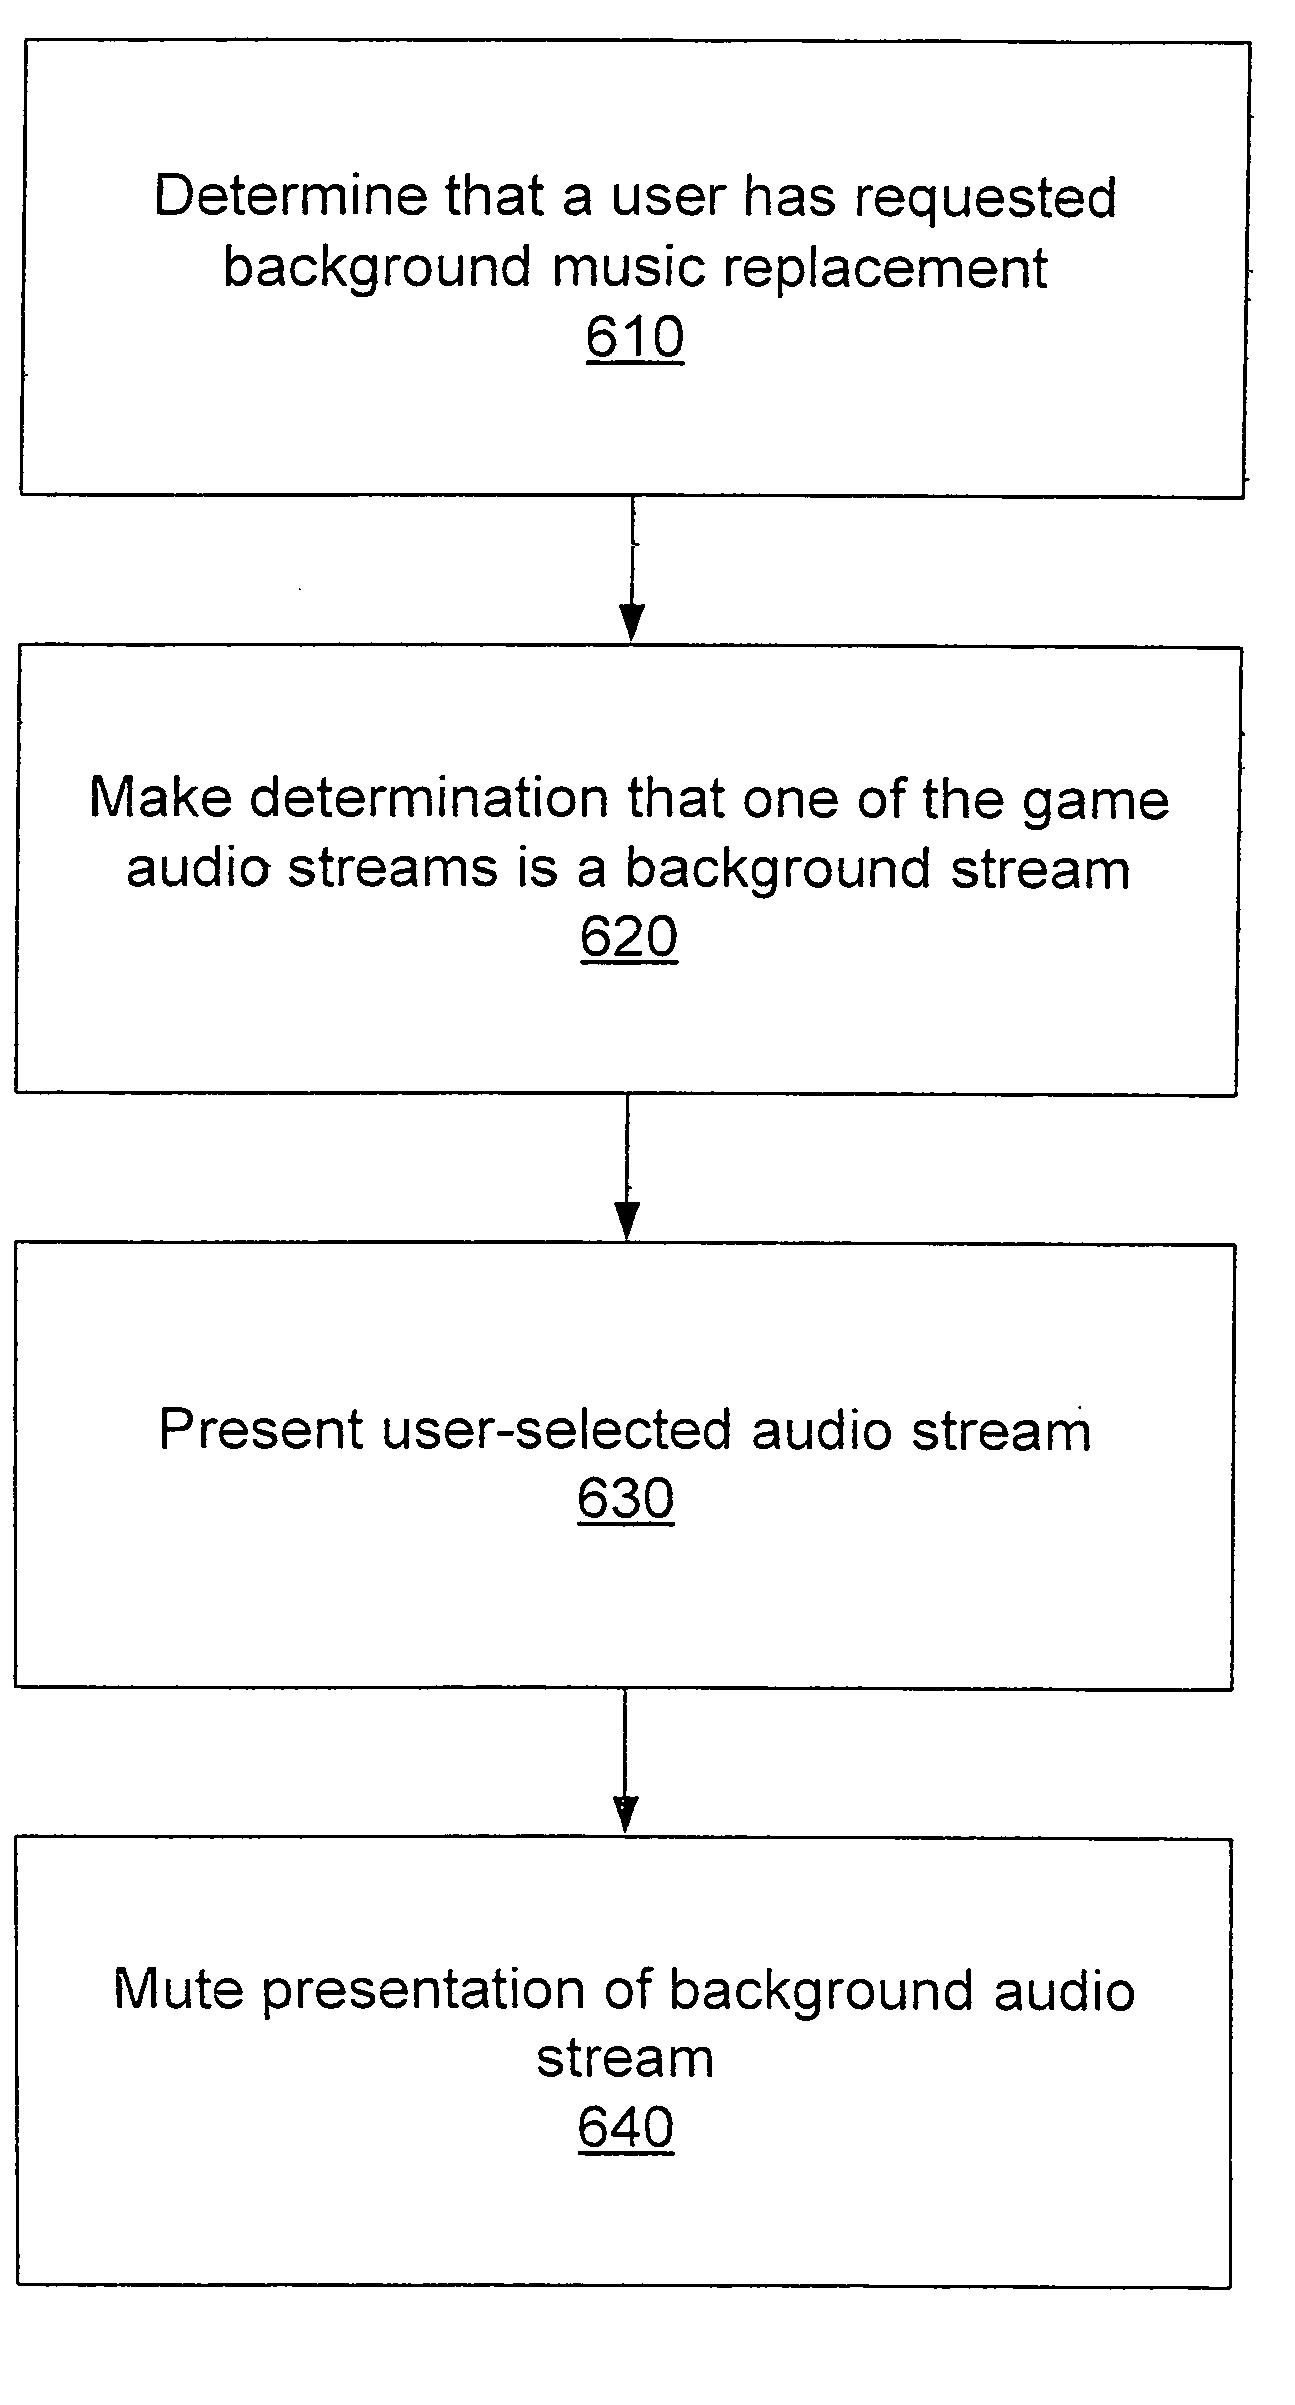 Music replacement in a gaming system